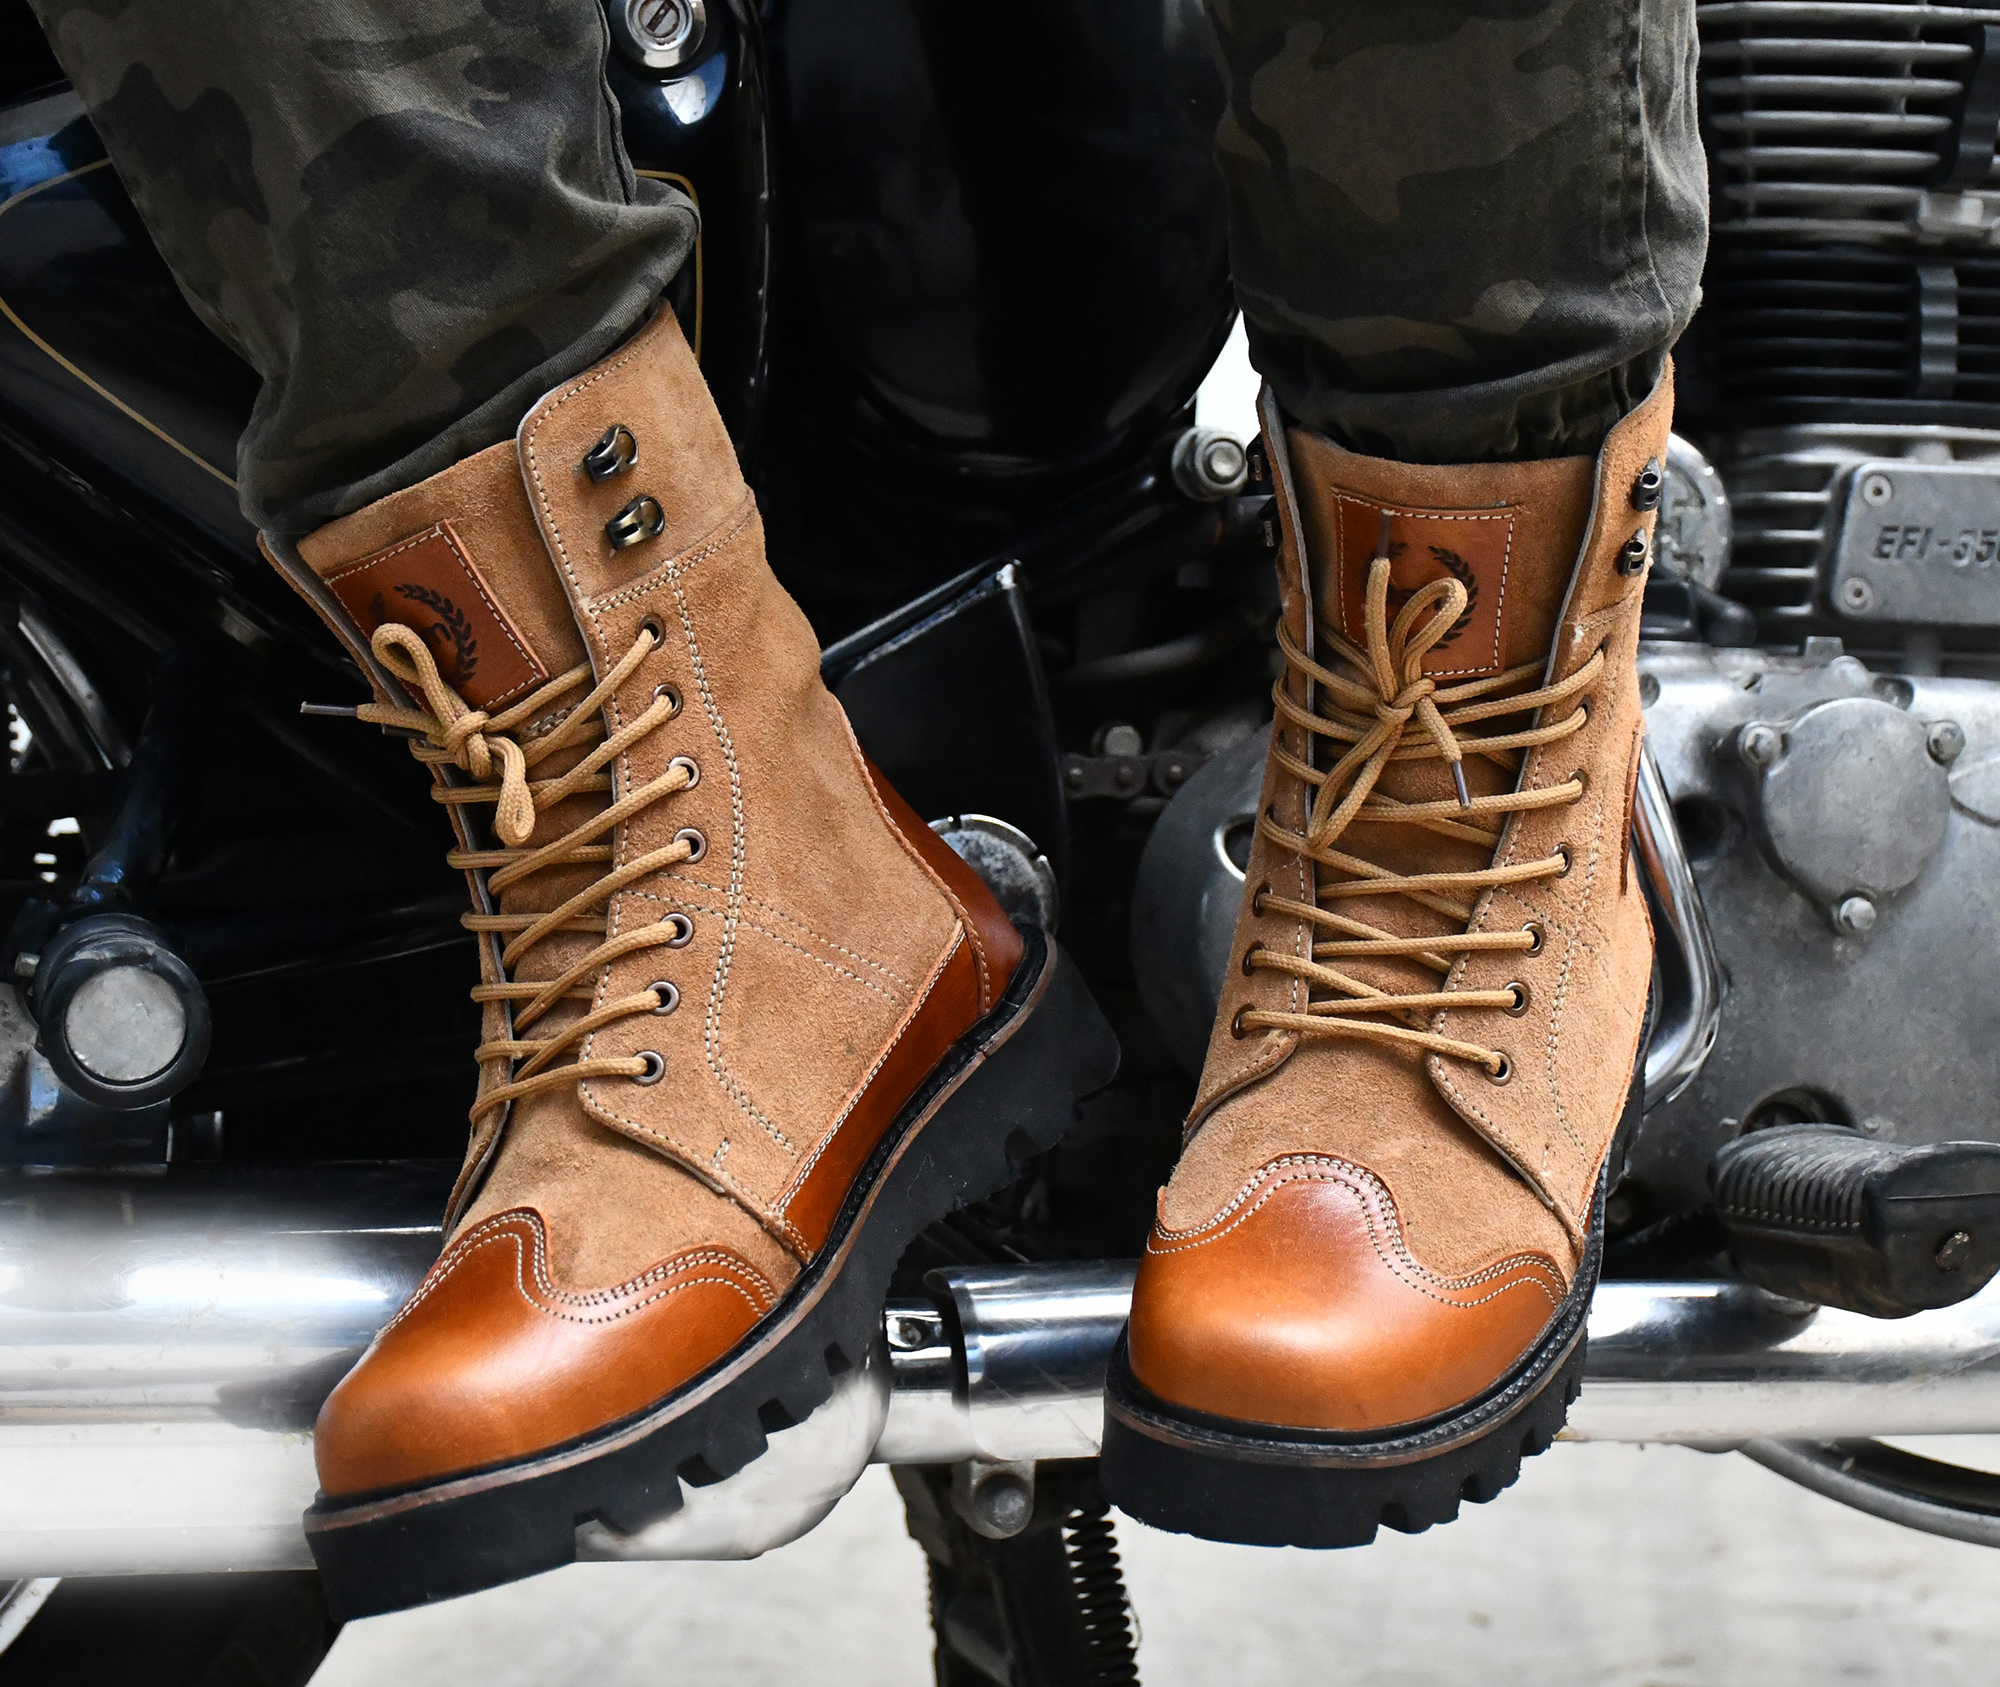 Biker Boots : Urban Rugged Tan & Suede leather boots for bikers with EVA Sole. Article : 702E-STan